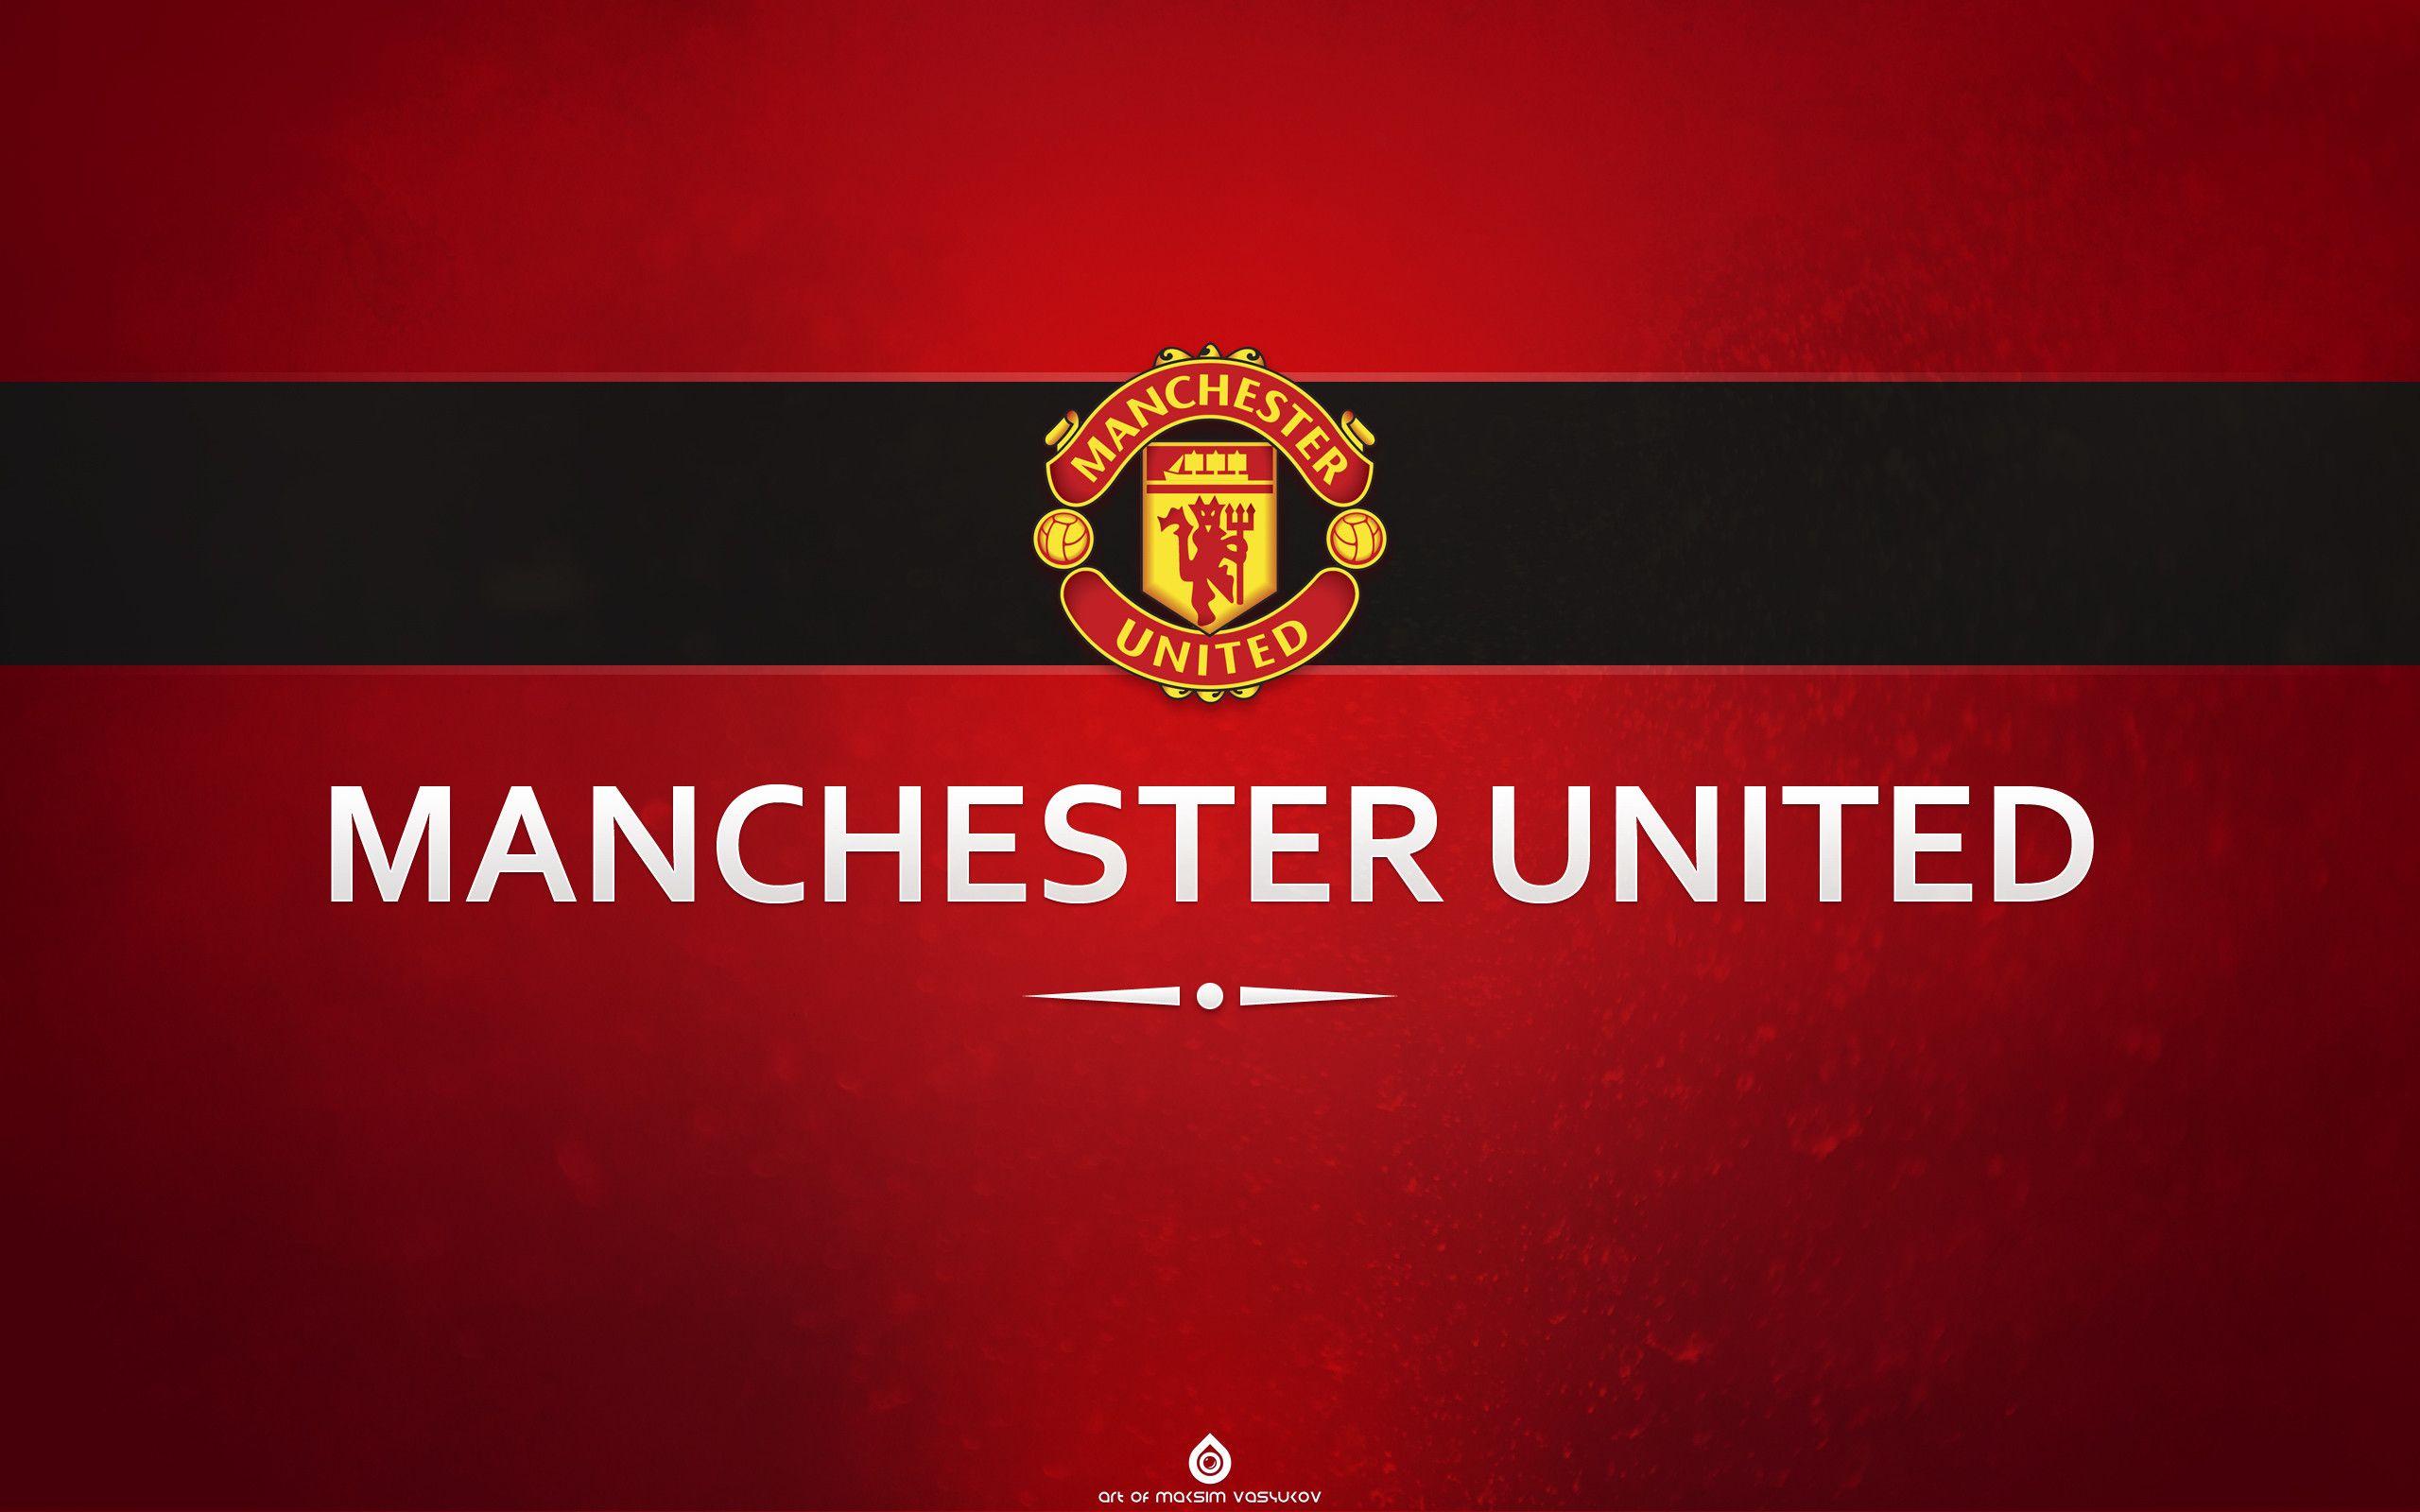 Manchester United HD Wallpaper. Manchester United Image. New